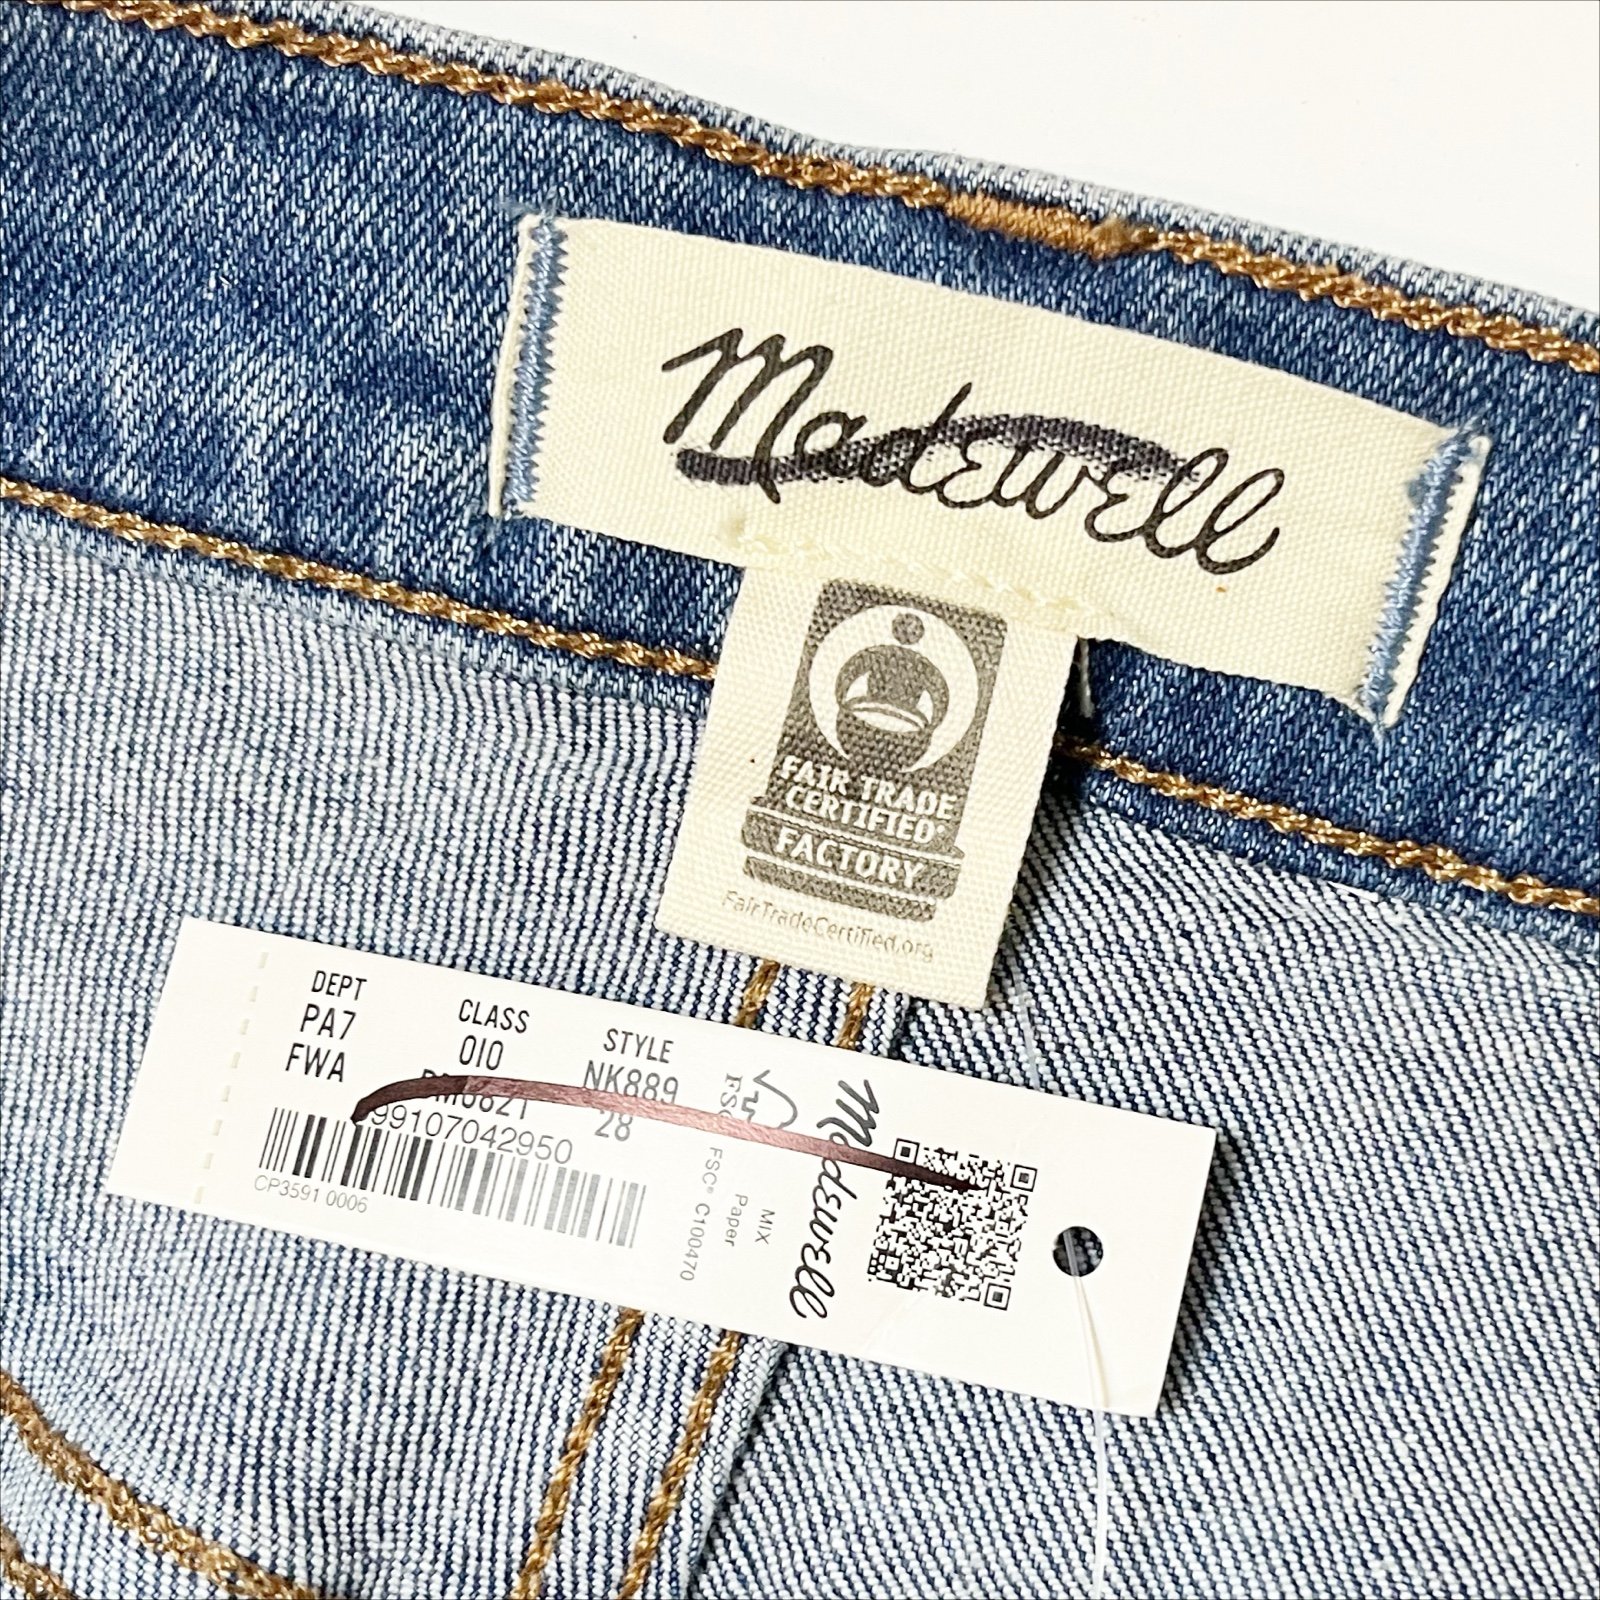 Authentic Madewell NWT Skinny Flare Jeans 28 6 high rise waist stretch retro faded blue MtfNzl0yl online store